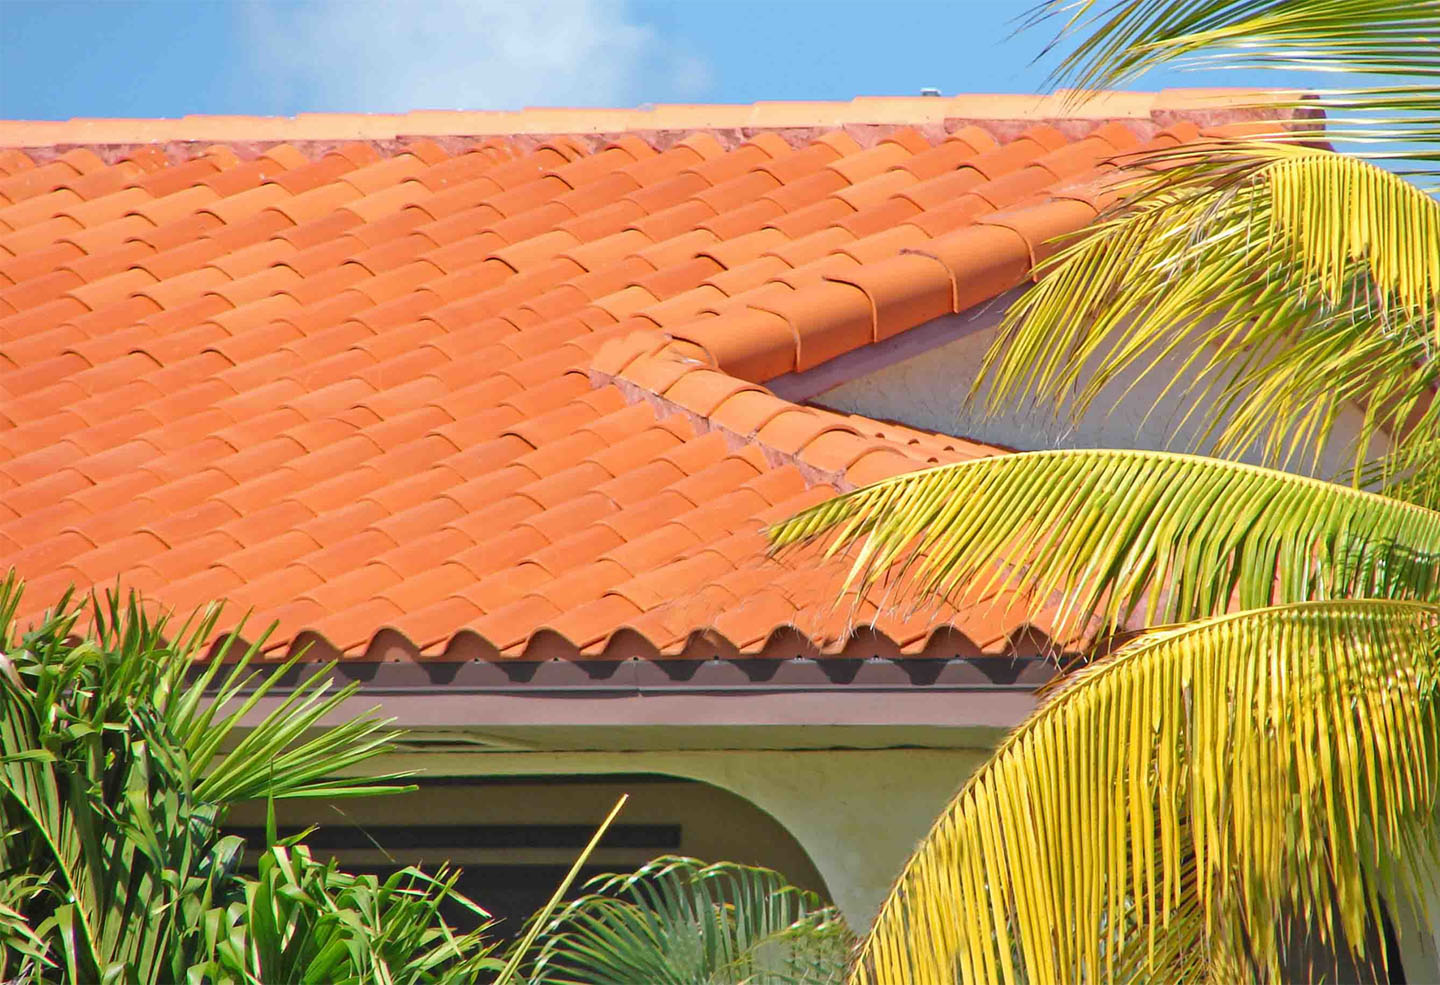 Clay tile roof